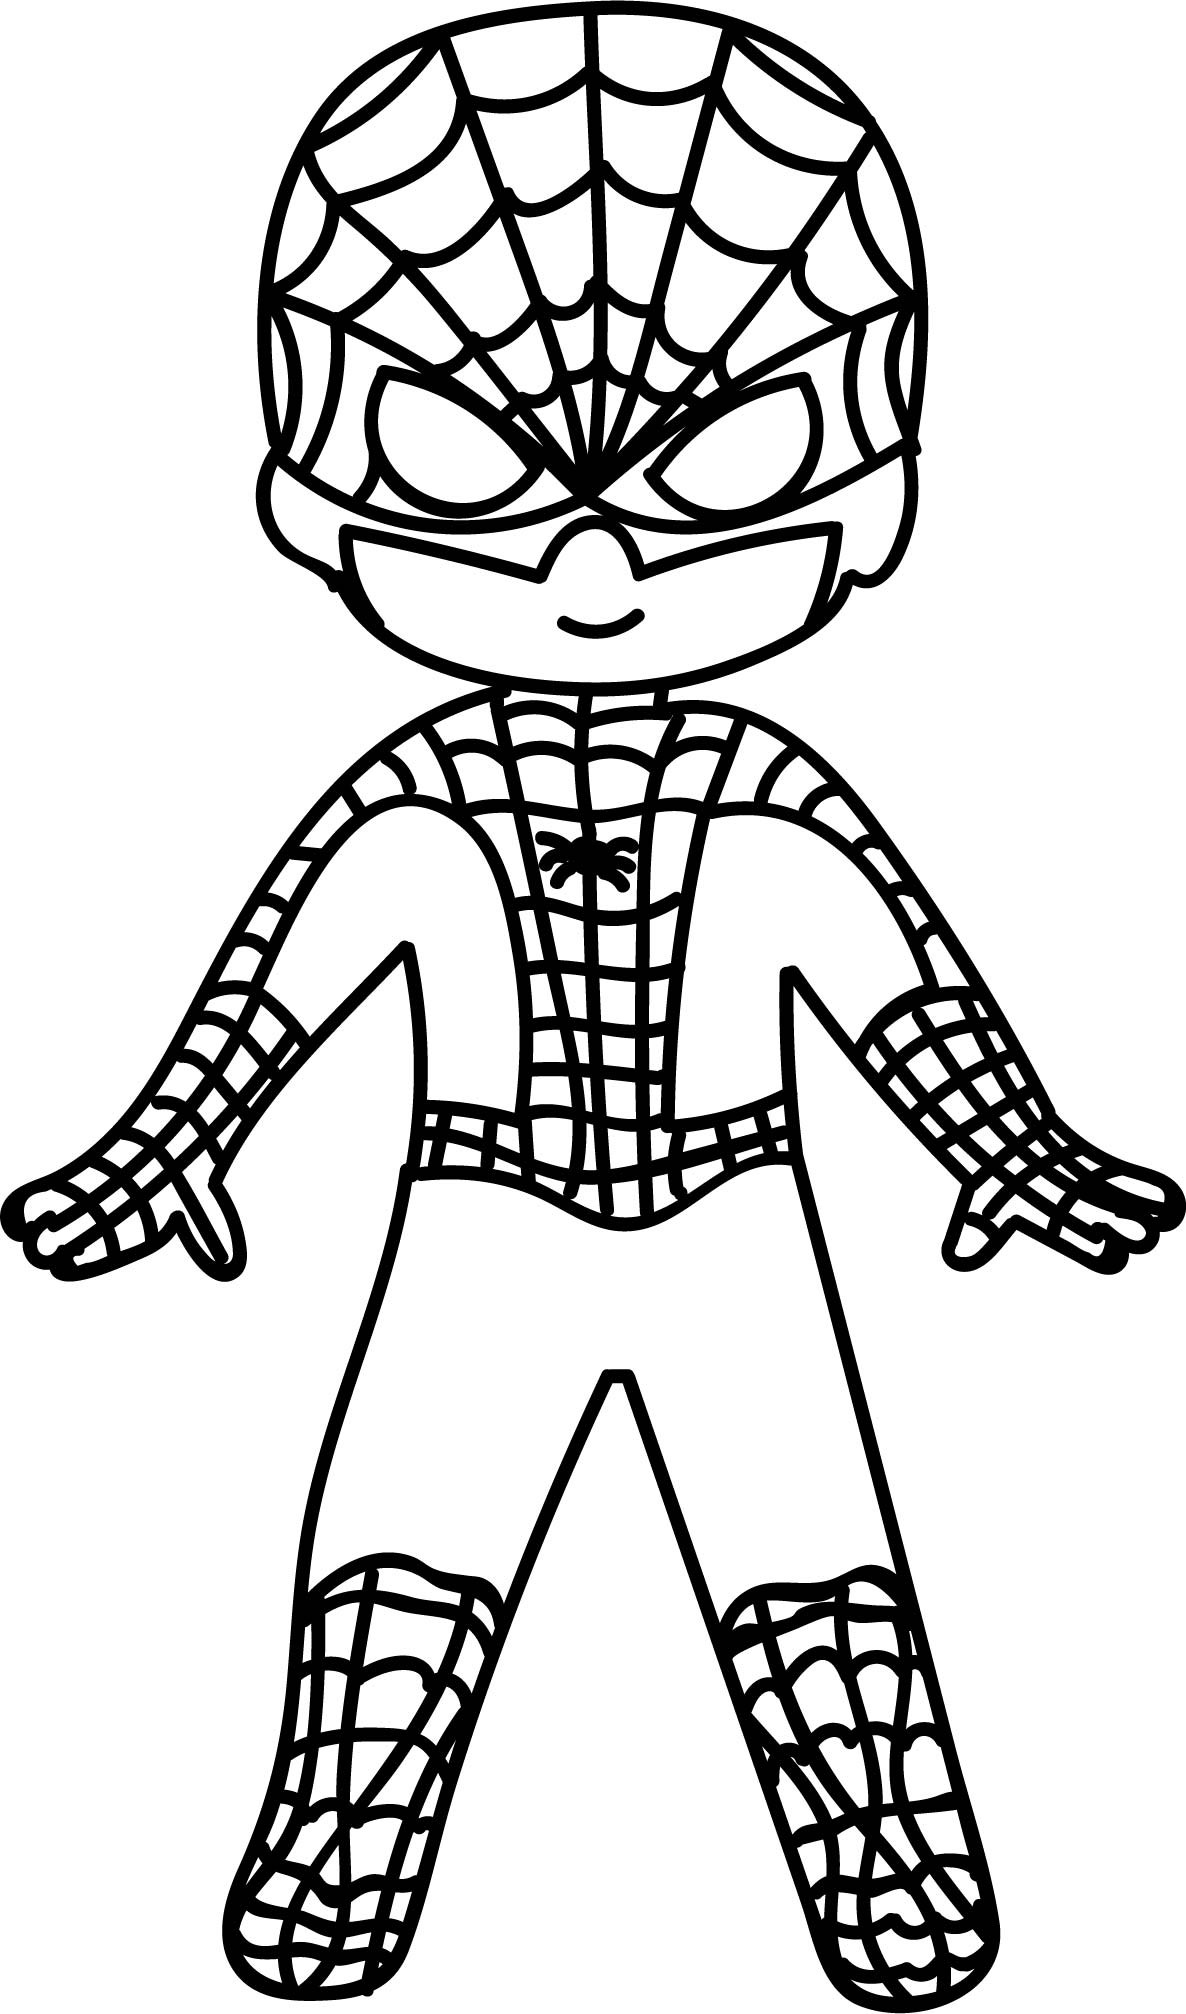 Coloring Pages For Kids Spiderman
 Spiderman Head Drawing at GetDrawings